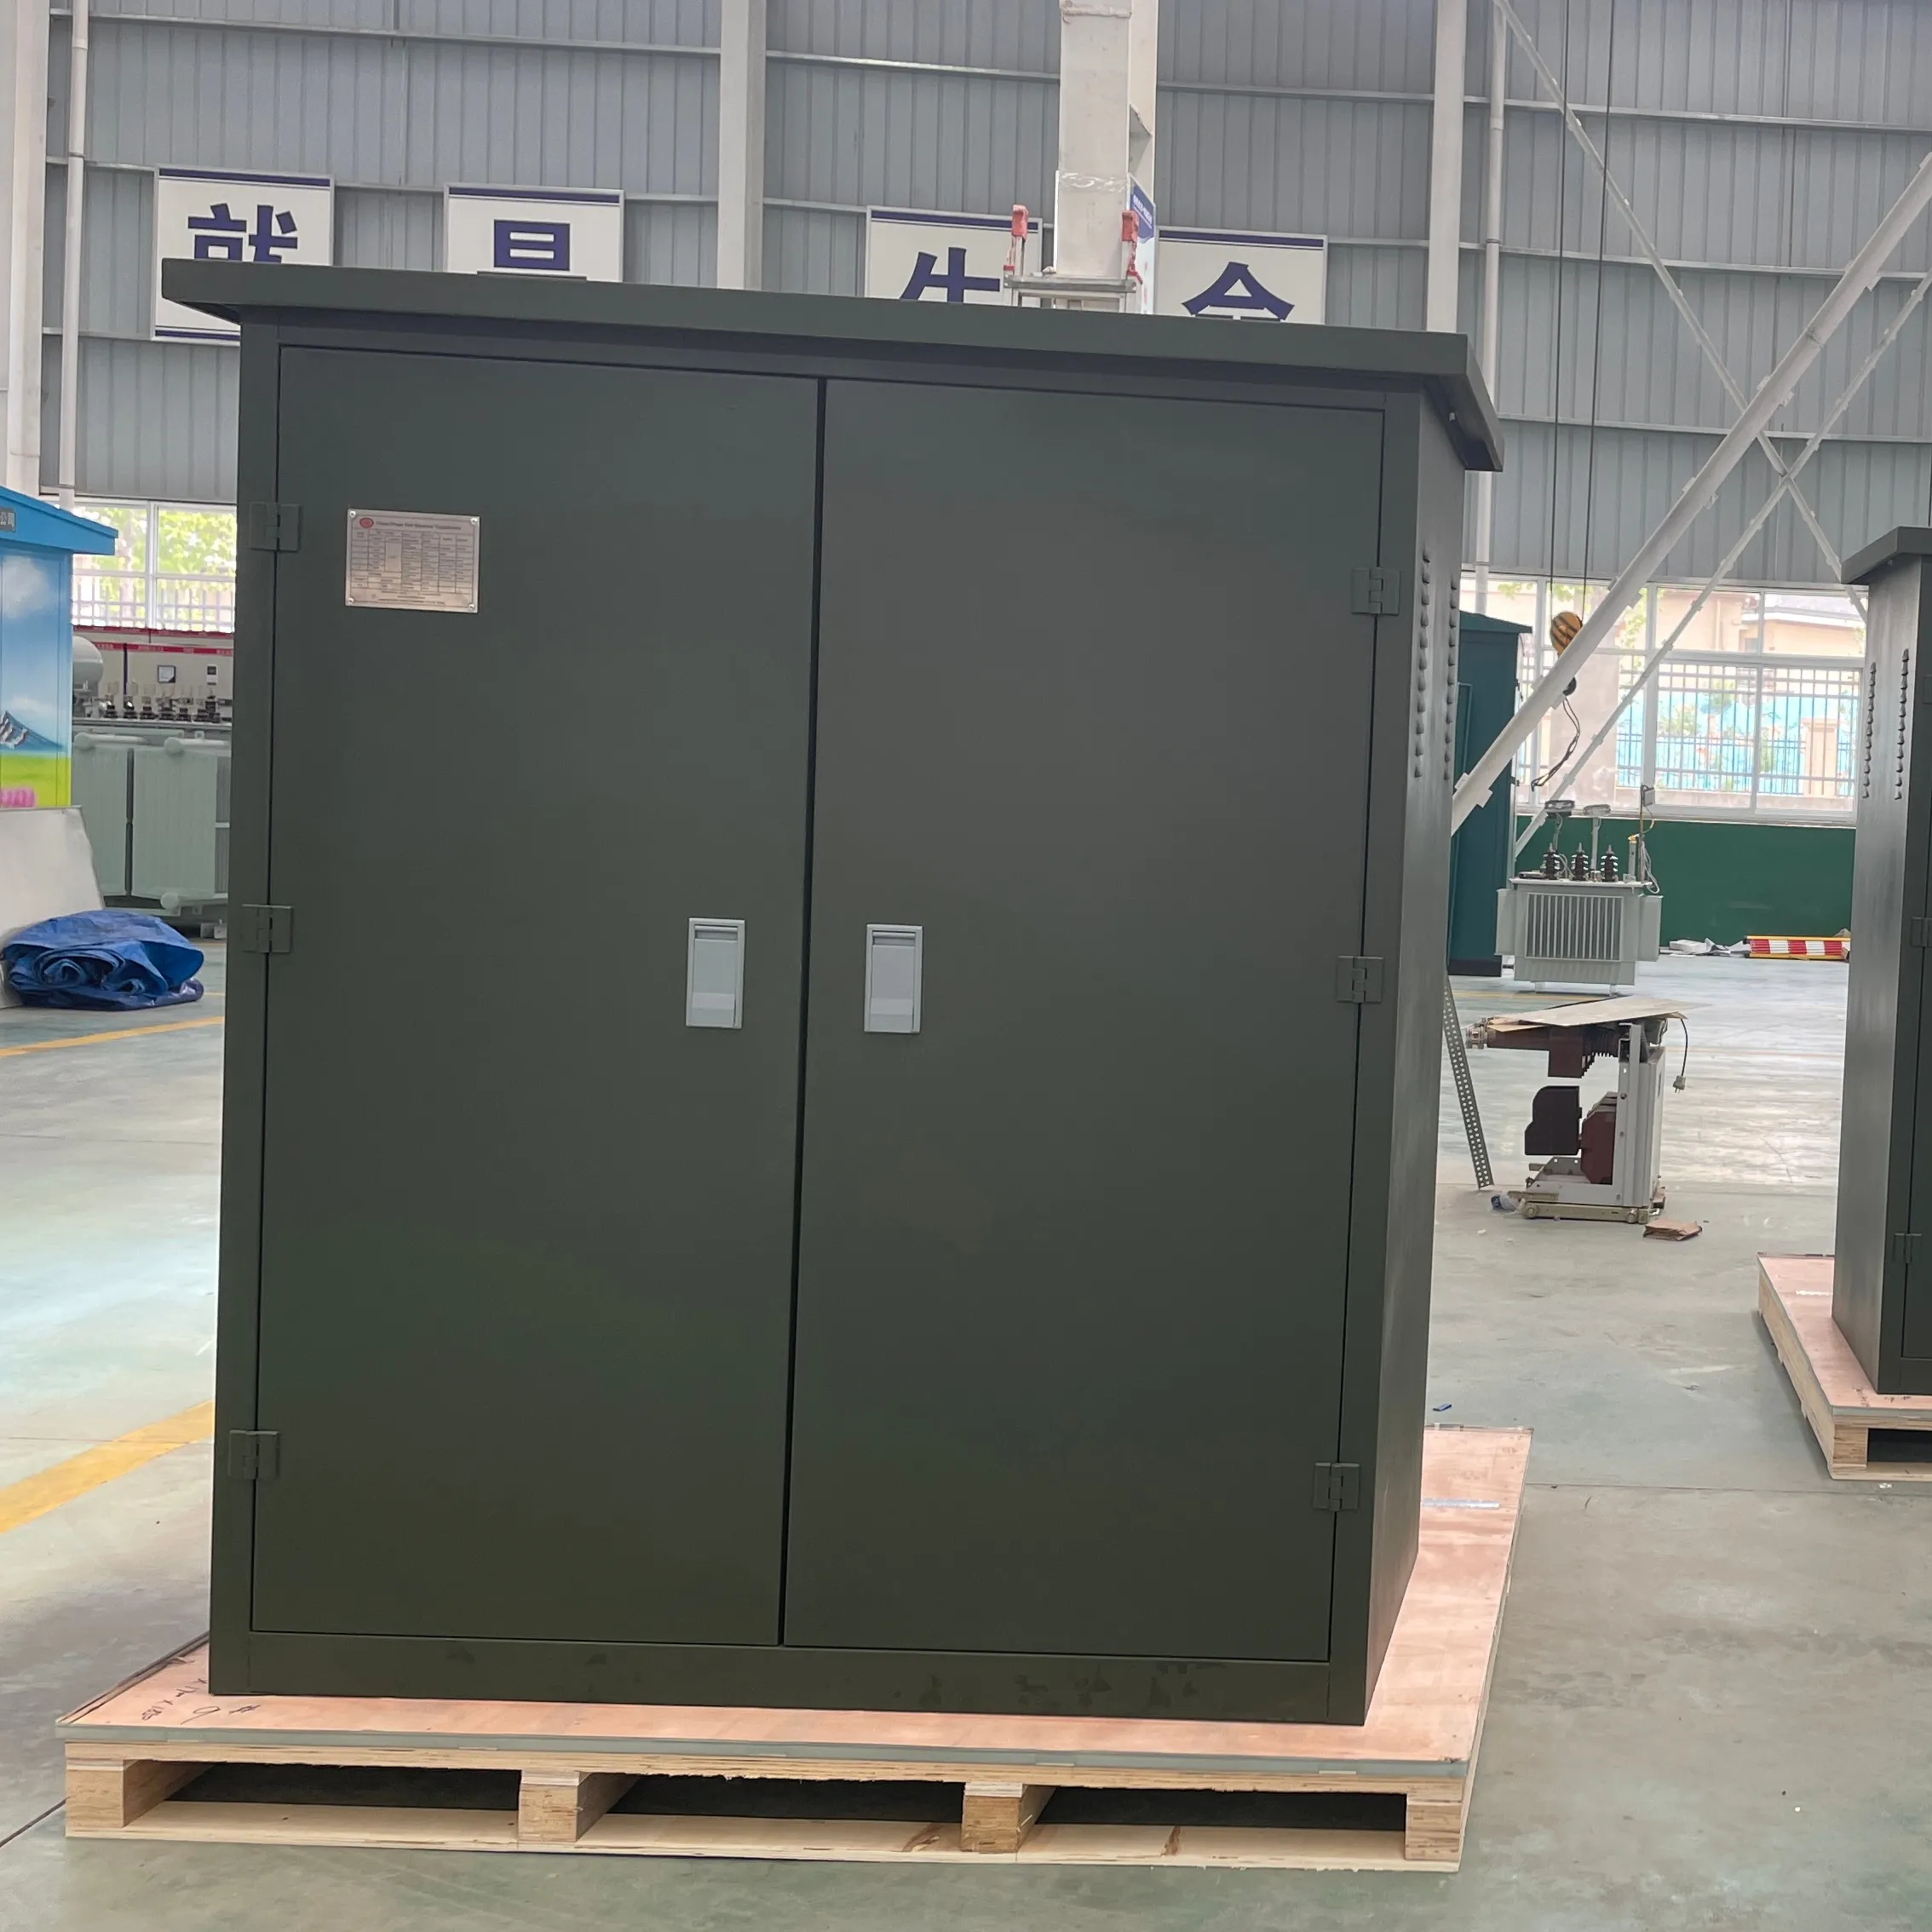 Case of MV prefabricated sub-station outdoor electrical power substation with IEC 61330 IP54 Origin From Xinghe